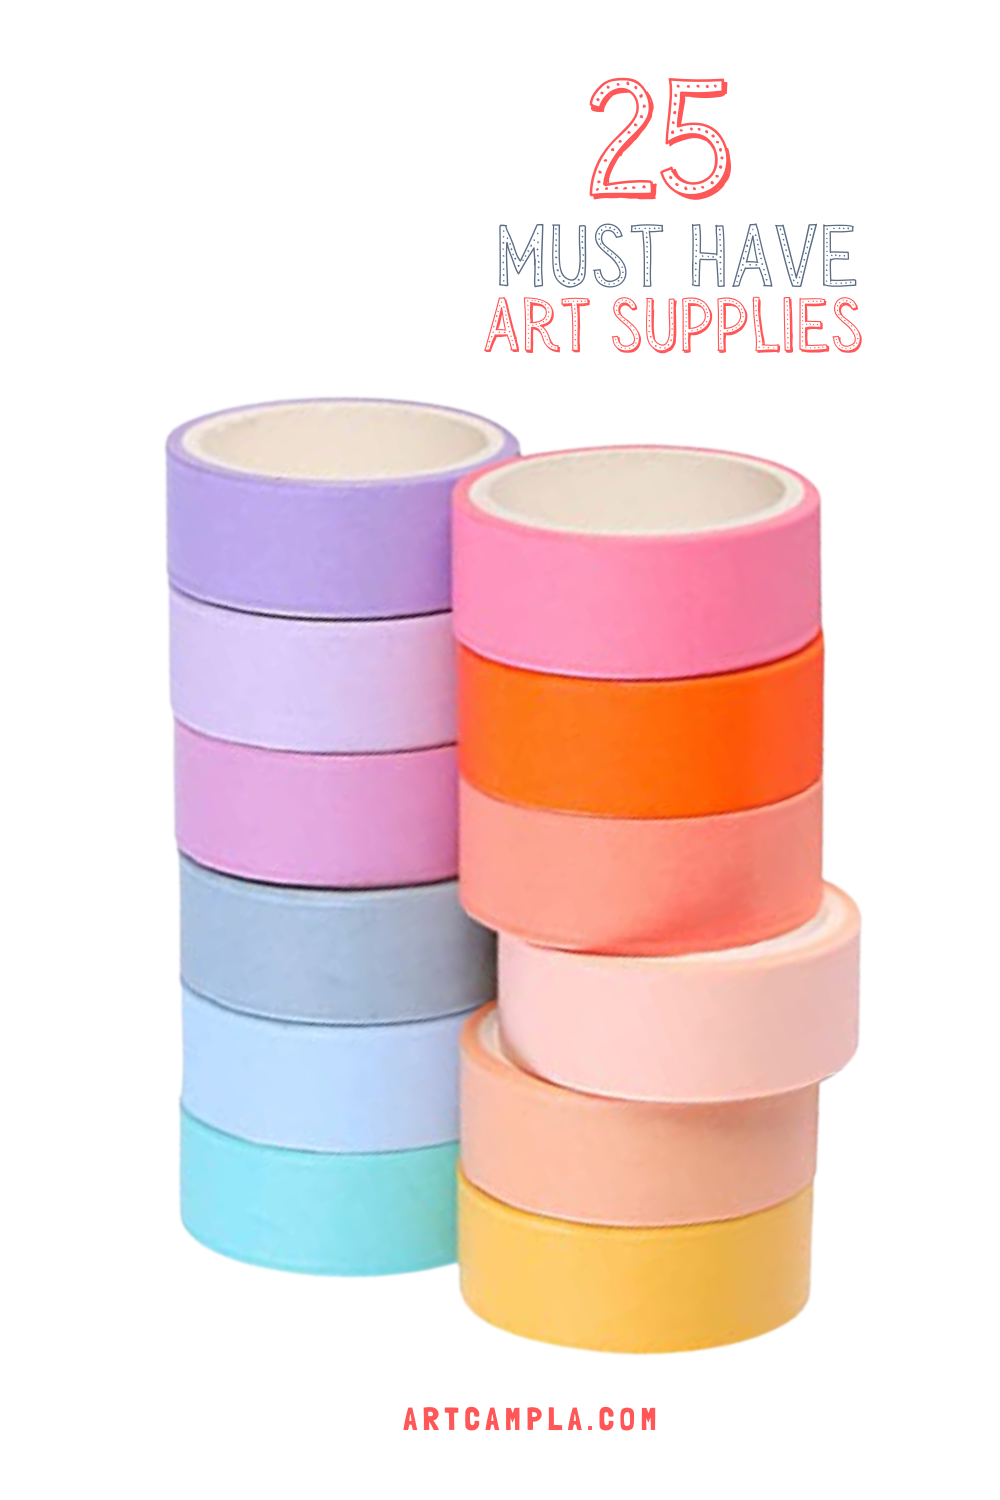 Amazing Art Supplies Every Artist Should Get - Society19